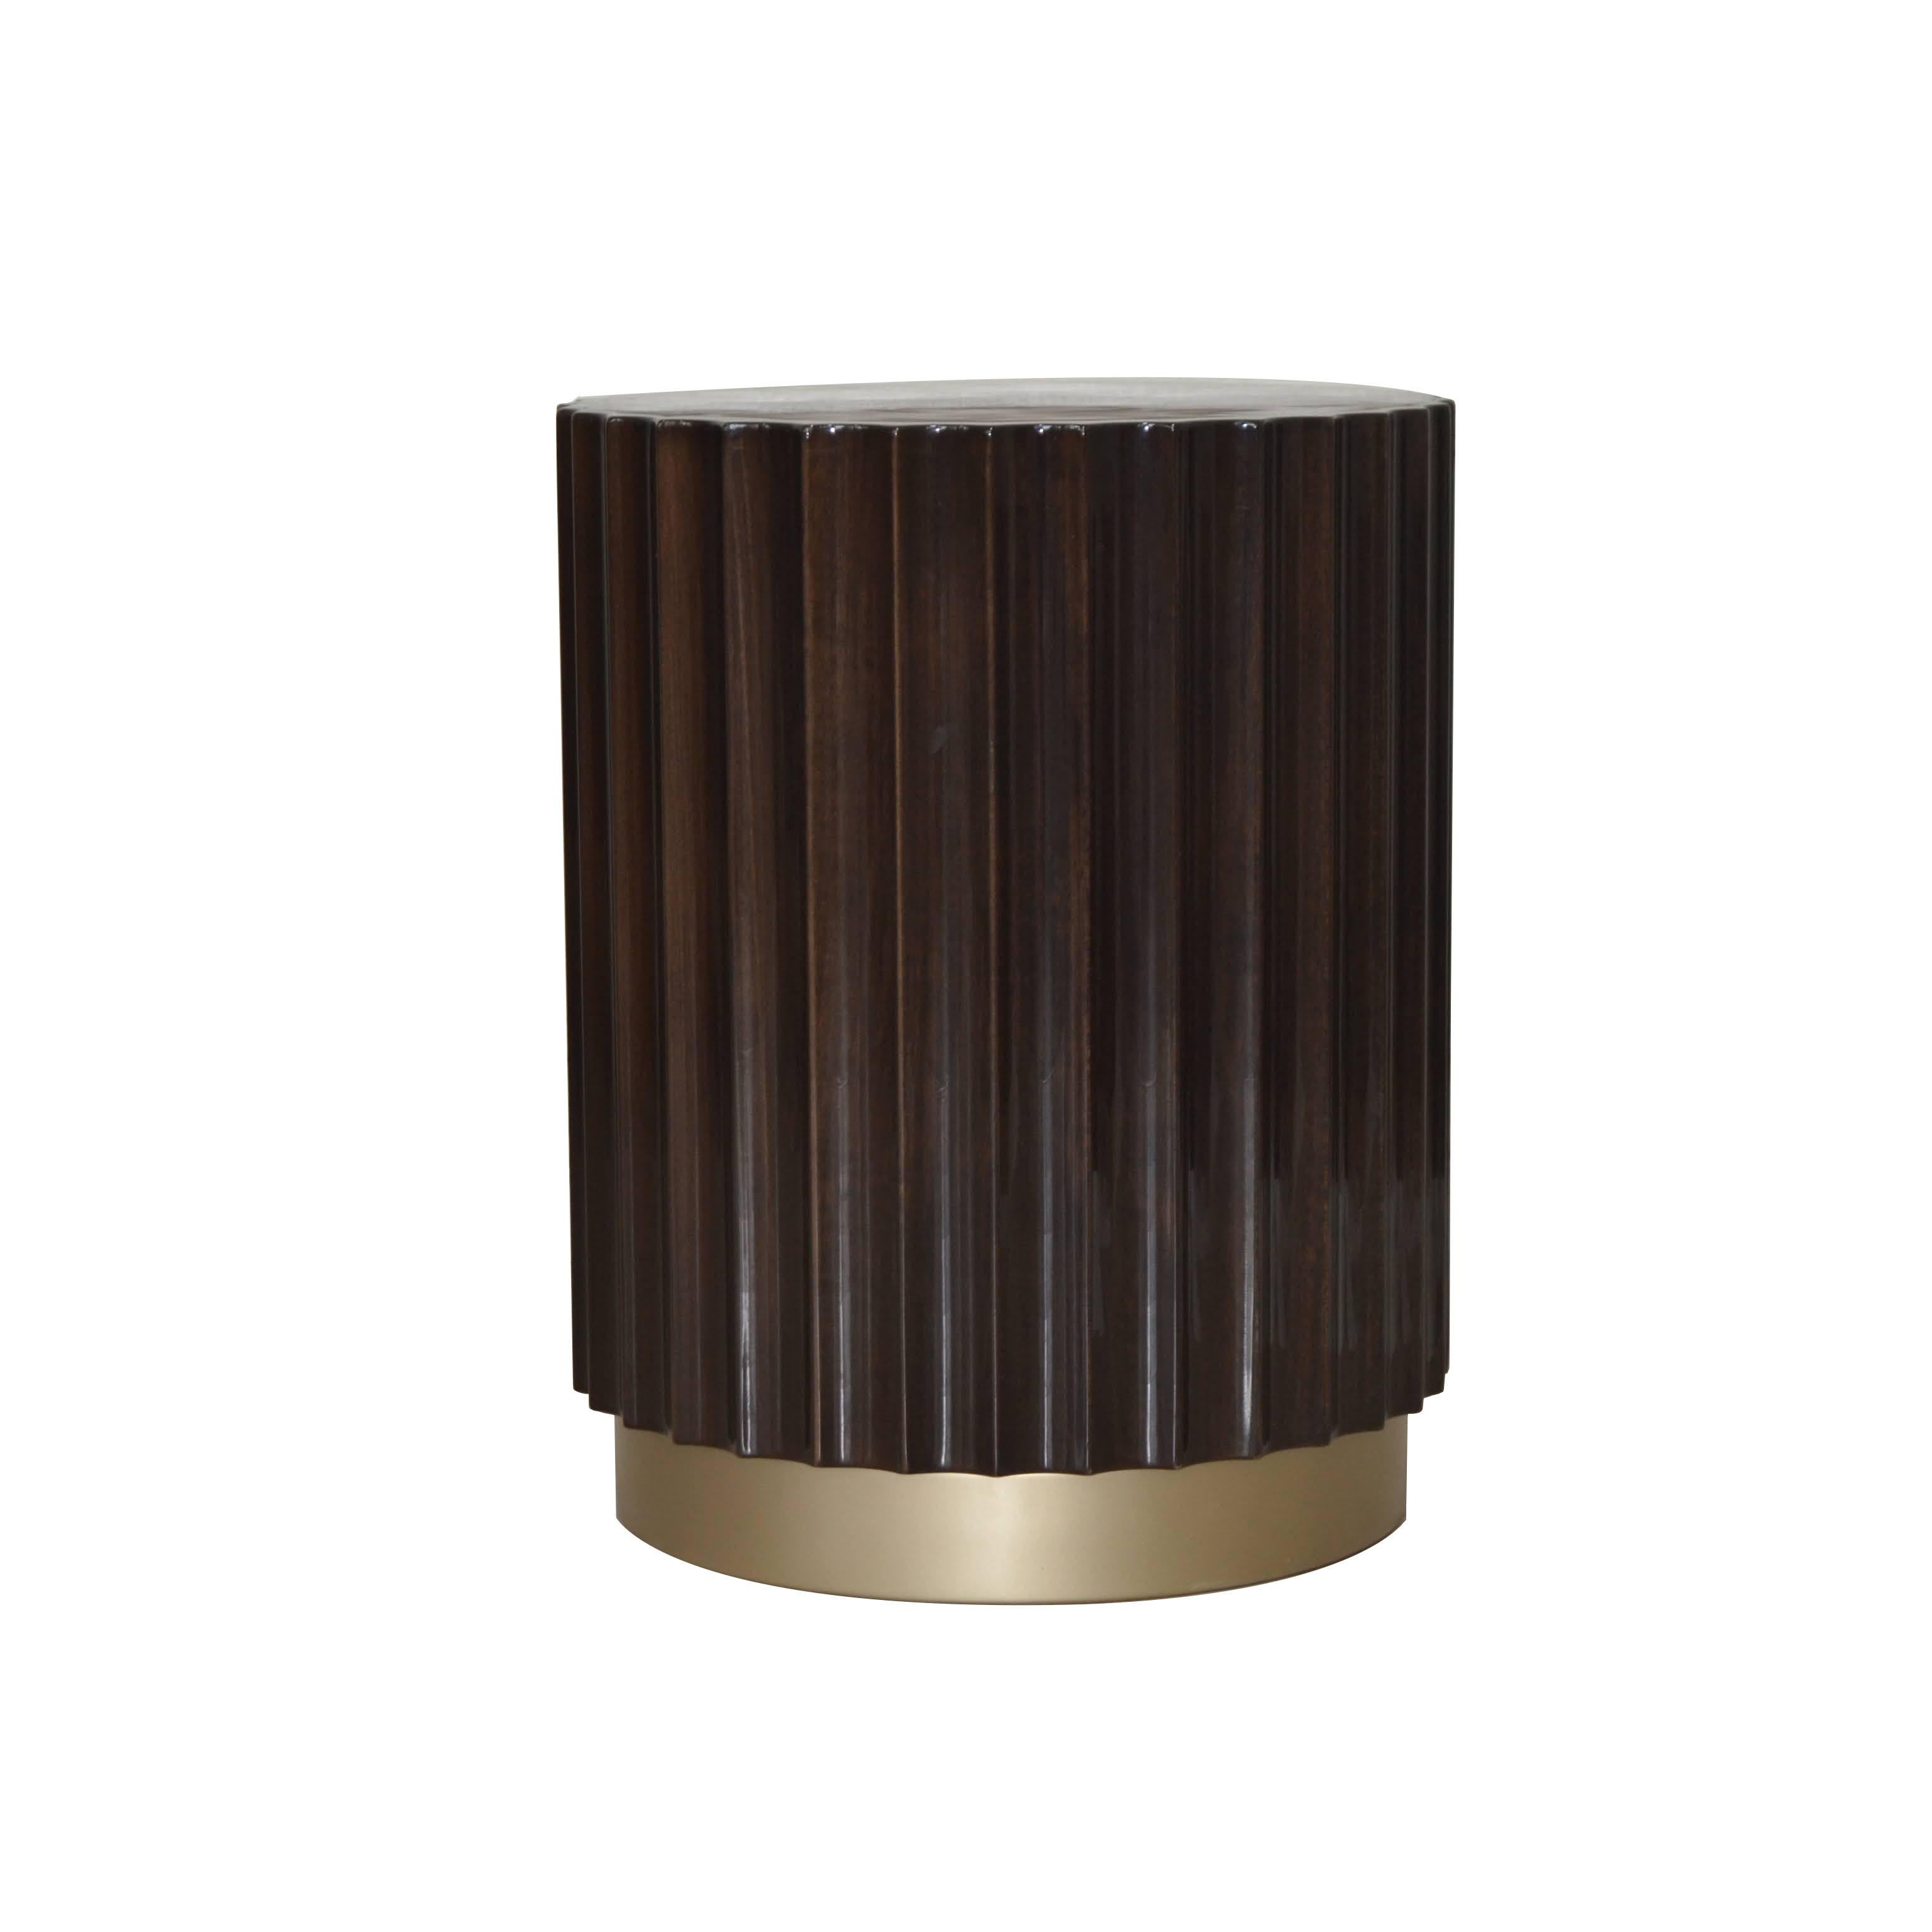 This column pedestal feature ebony brown color with brass painted base. Beautiful glossy lacquer finish, inspired from greek ancient architecture; can also be used as a bedside table.